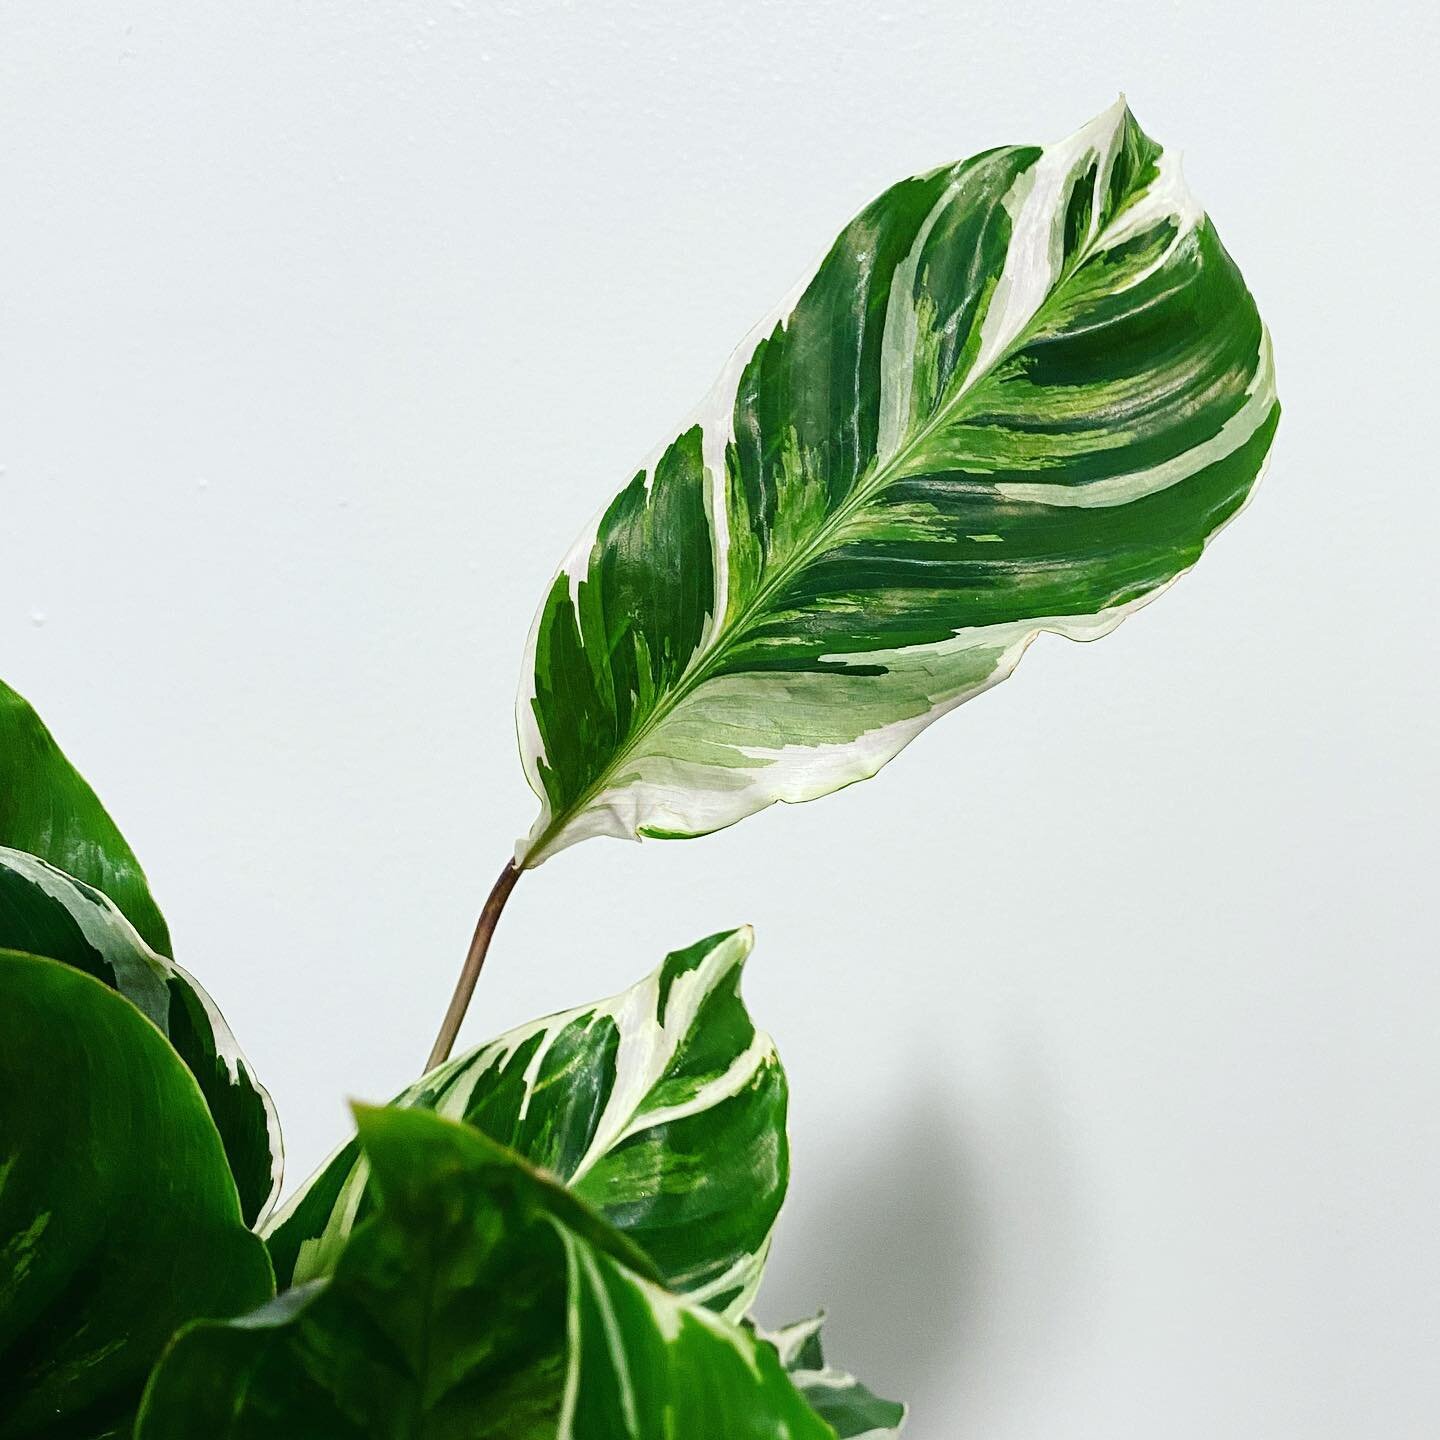 🌱It&rsquo;s ok to stand out from the crowd 🌿
🙌🏽You&rsquo;re just reaching for the shine you deserve☀️ 
&bull;&bull;&bull;&bull;&bull;
#grandrising #calatheawhitefusion #plantsinLapuente #habitatplants #beautyinallforms #naturalbeauty #beautyybien